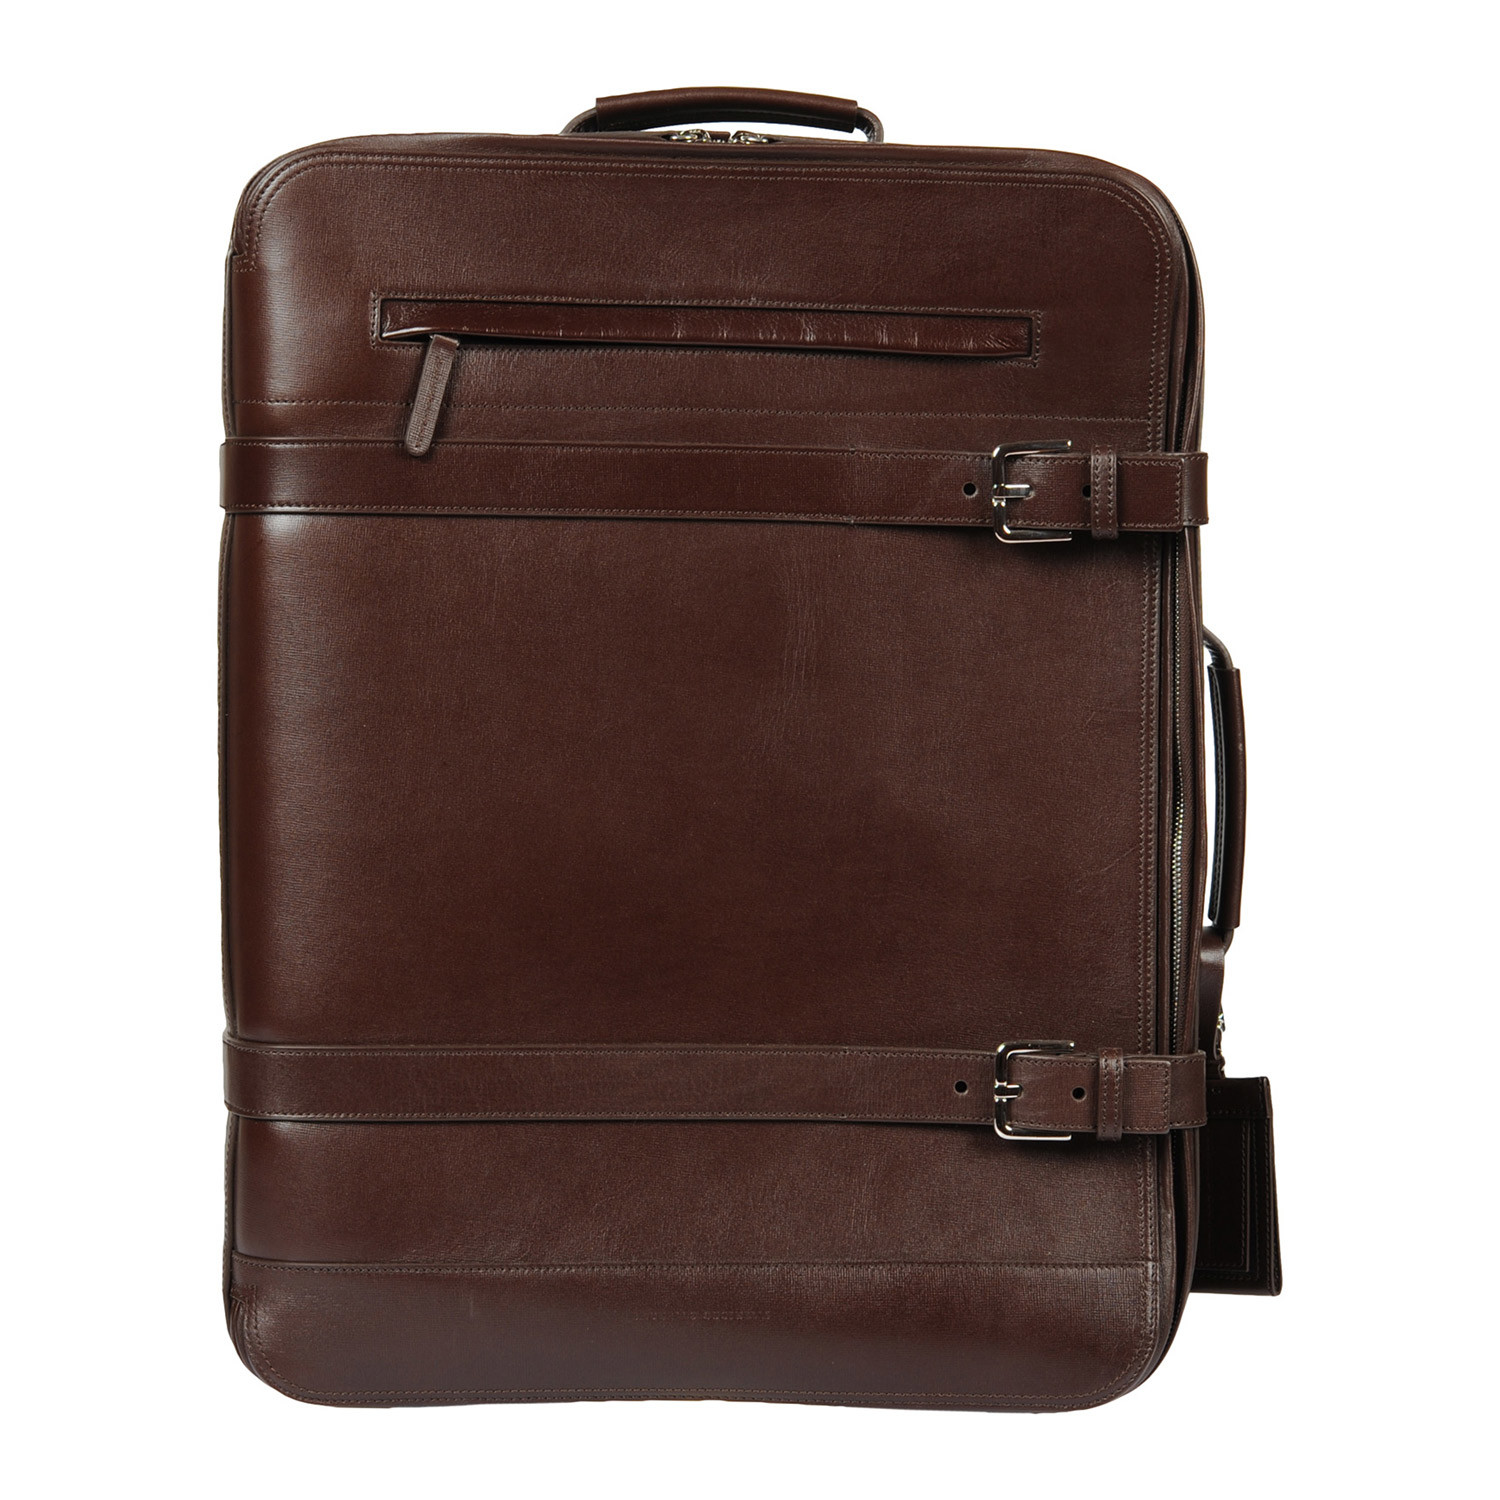 Leather Rolling Luggage Trolley // Brown - Brunello Cucinelli - Touch ...